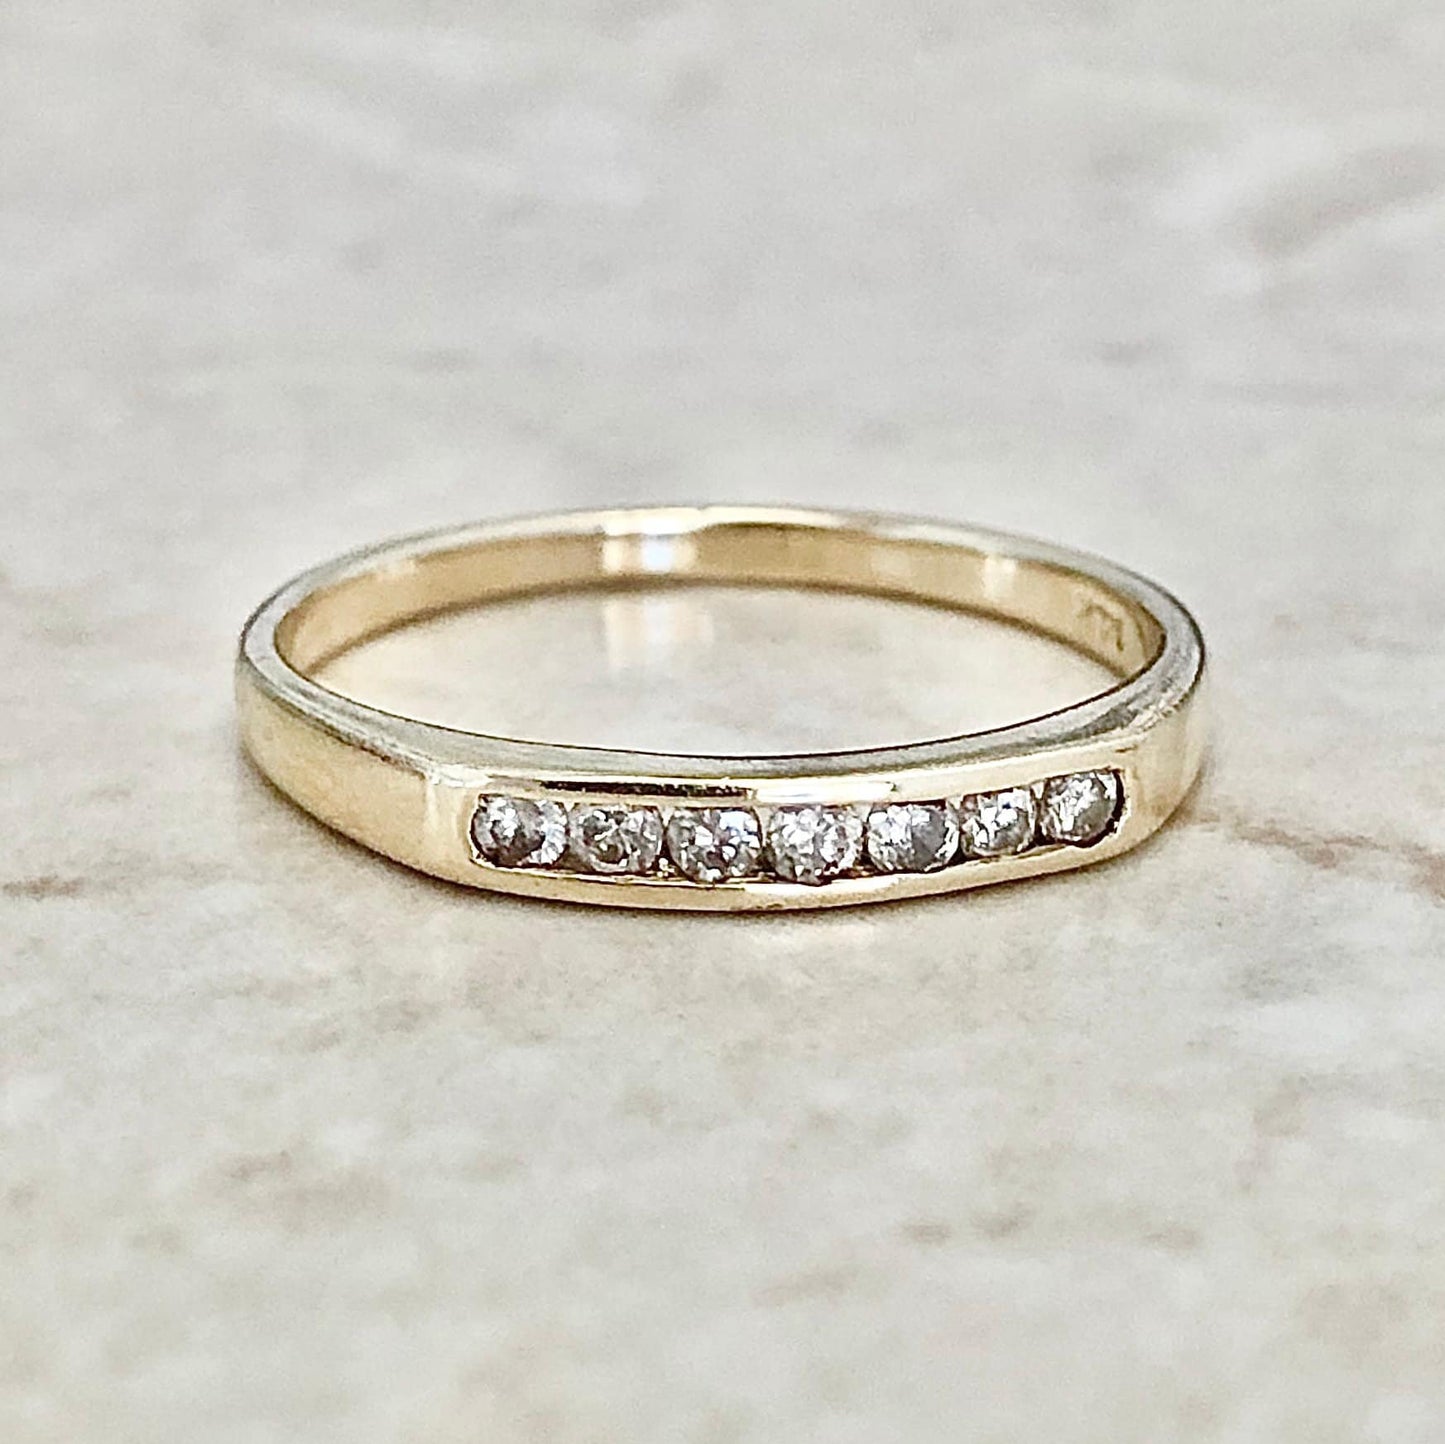 14 Karat Yellow Gold Diamond Band Ring 0.15 CTTW - Diamond Stackable Ring - Anniversary Ring - Valentine’s Day Gift - Size 6.75